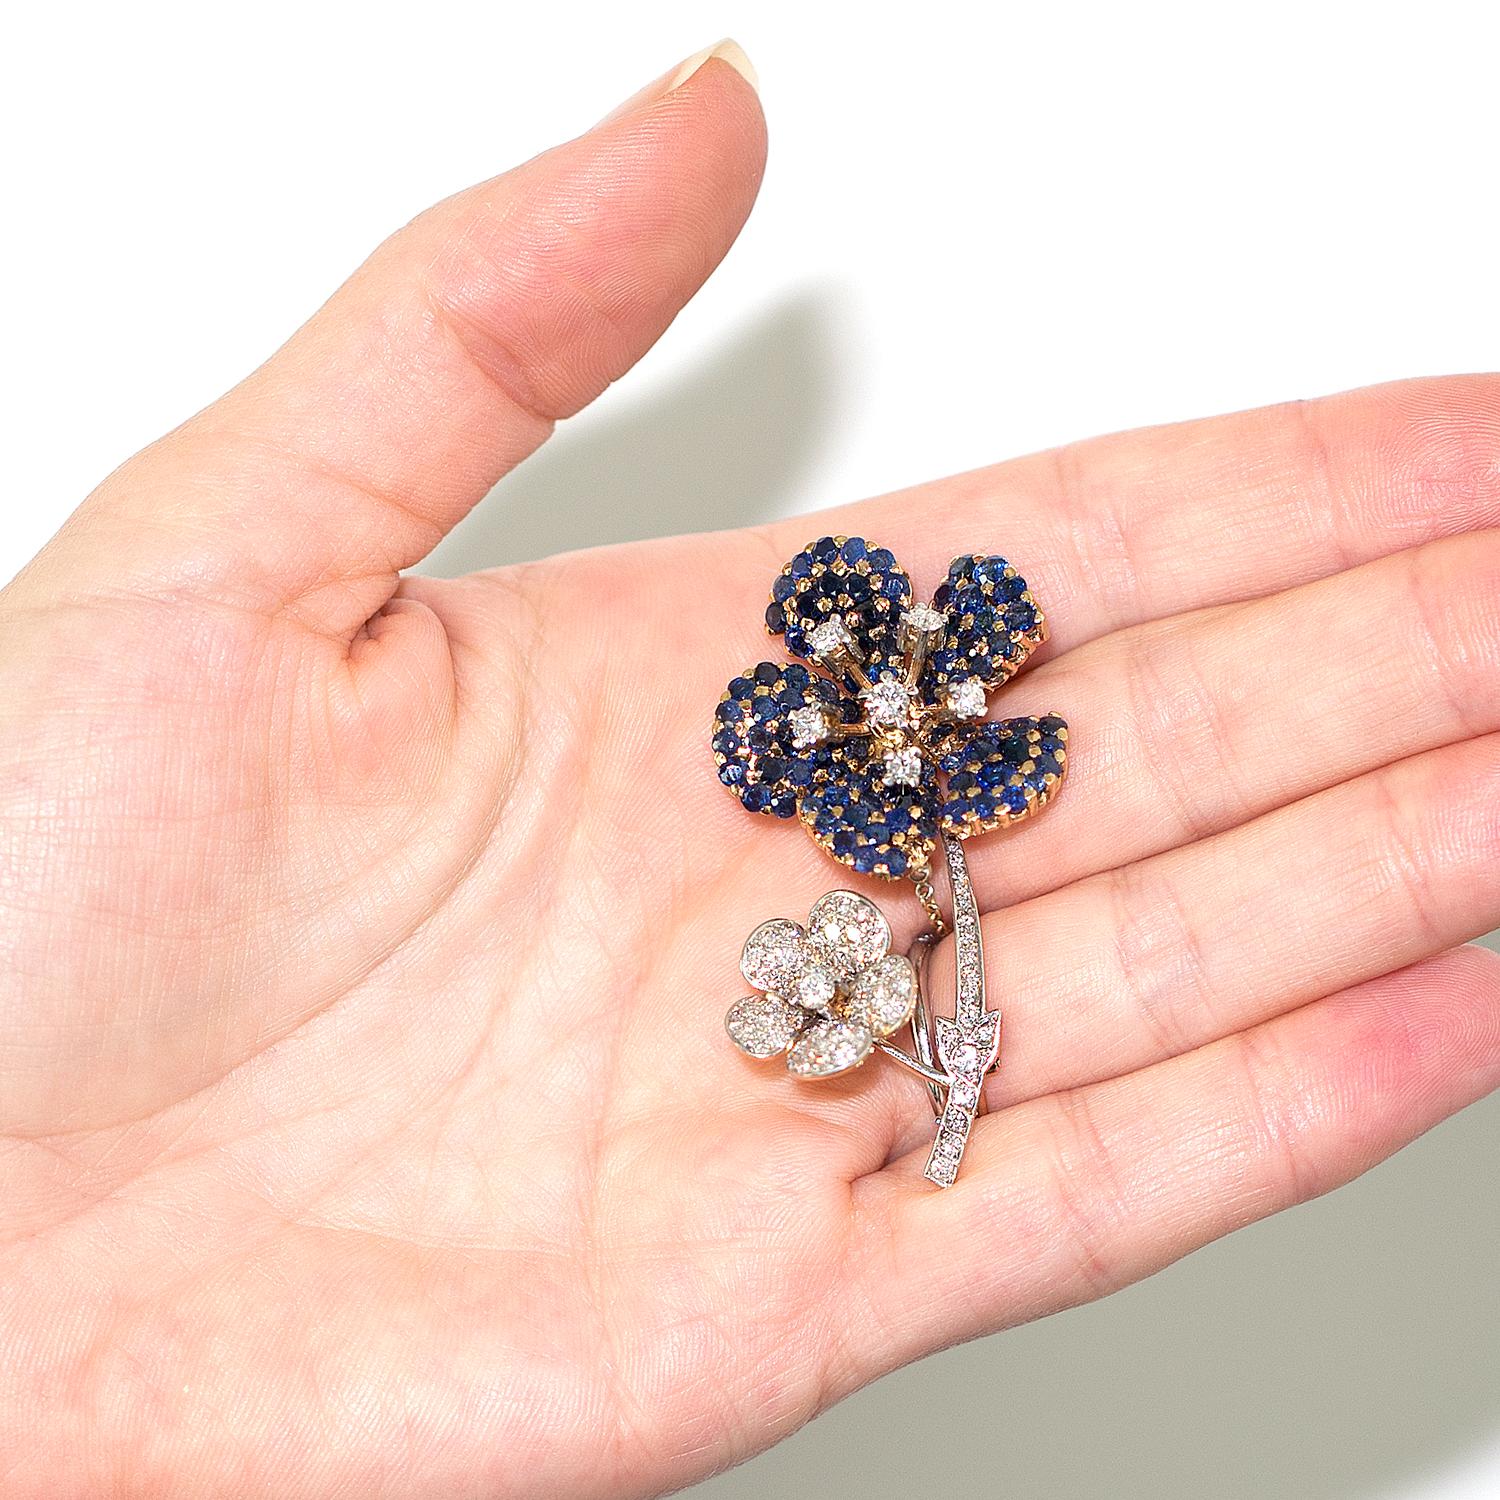 A beautiful floral diamond and sapphire brooch, set in 18 karat white & yellow gold. The diamonds are G in color and VS in clarity, with an approximate total weight of 2 carats.  